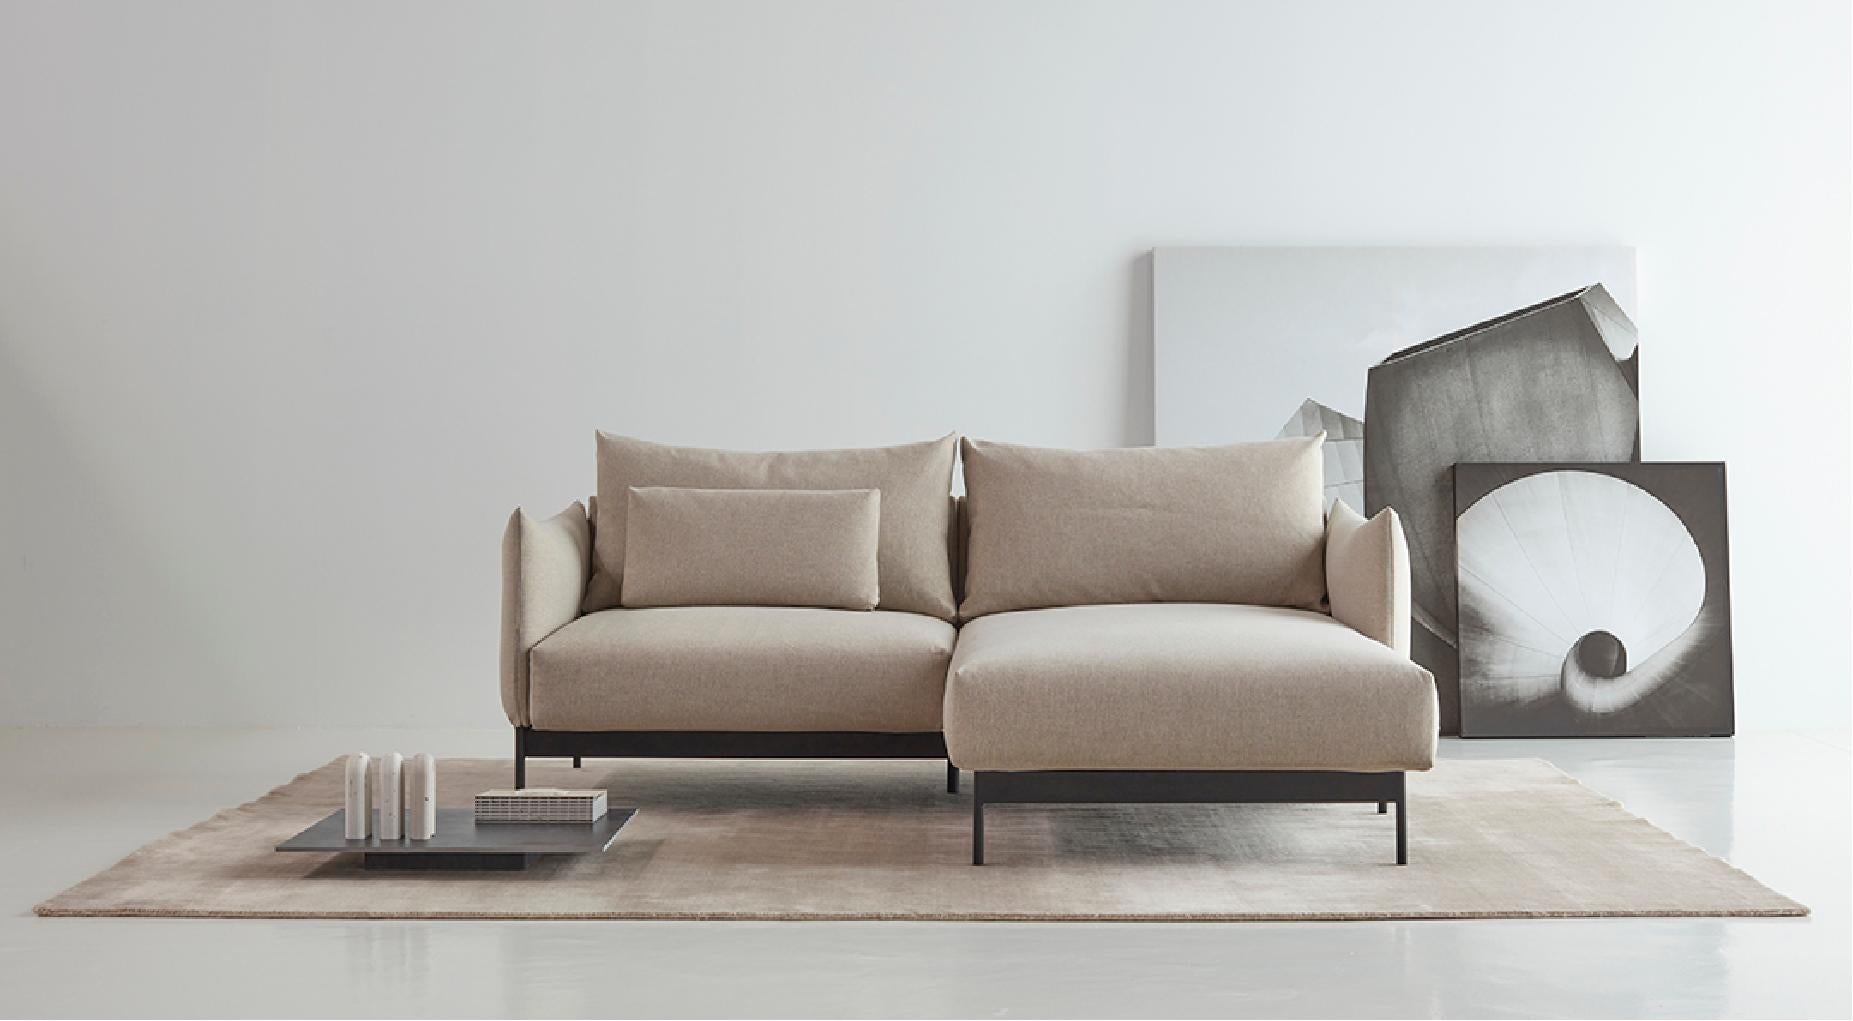 The Leyi Chaise+1 embodies sustainable design principles with its contemporary elegance. This meaningful OEM product offers practicality and exceptional comfort, ensuring a long life-cycle. Its removable and washable covers facilitate effortless